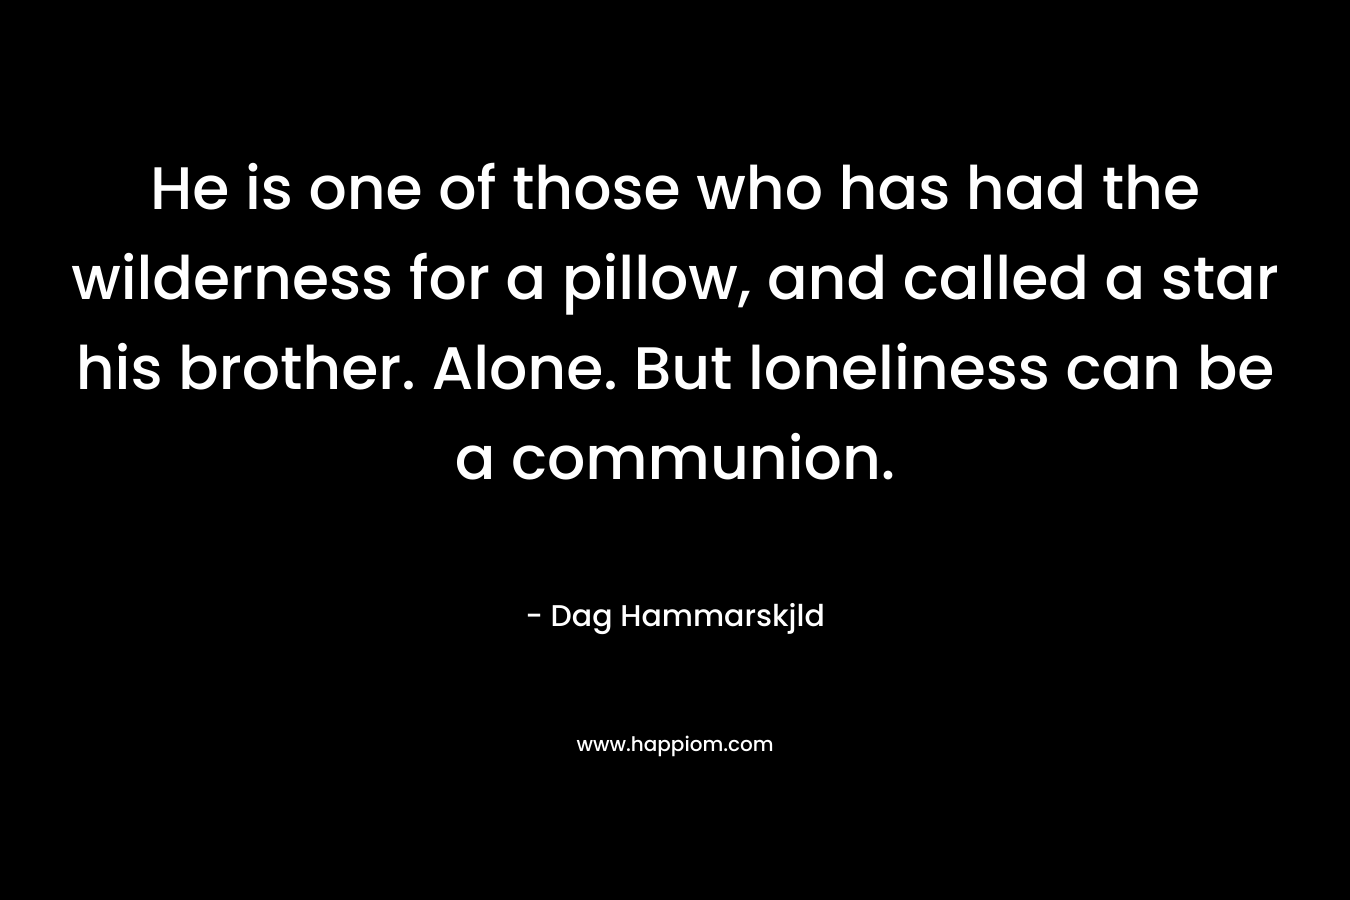 He is one of those who has had the wilderness for a pillow, and called a star his brother. Alone. But loneliness can be a communion. – Dag Hammarskjld